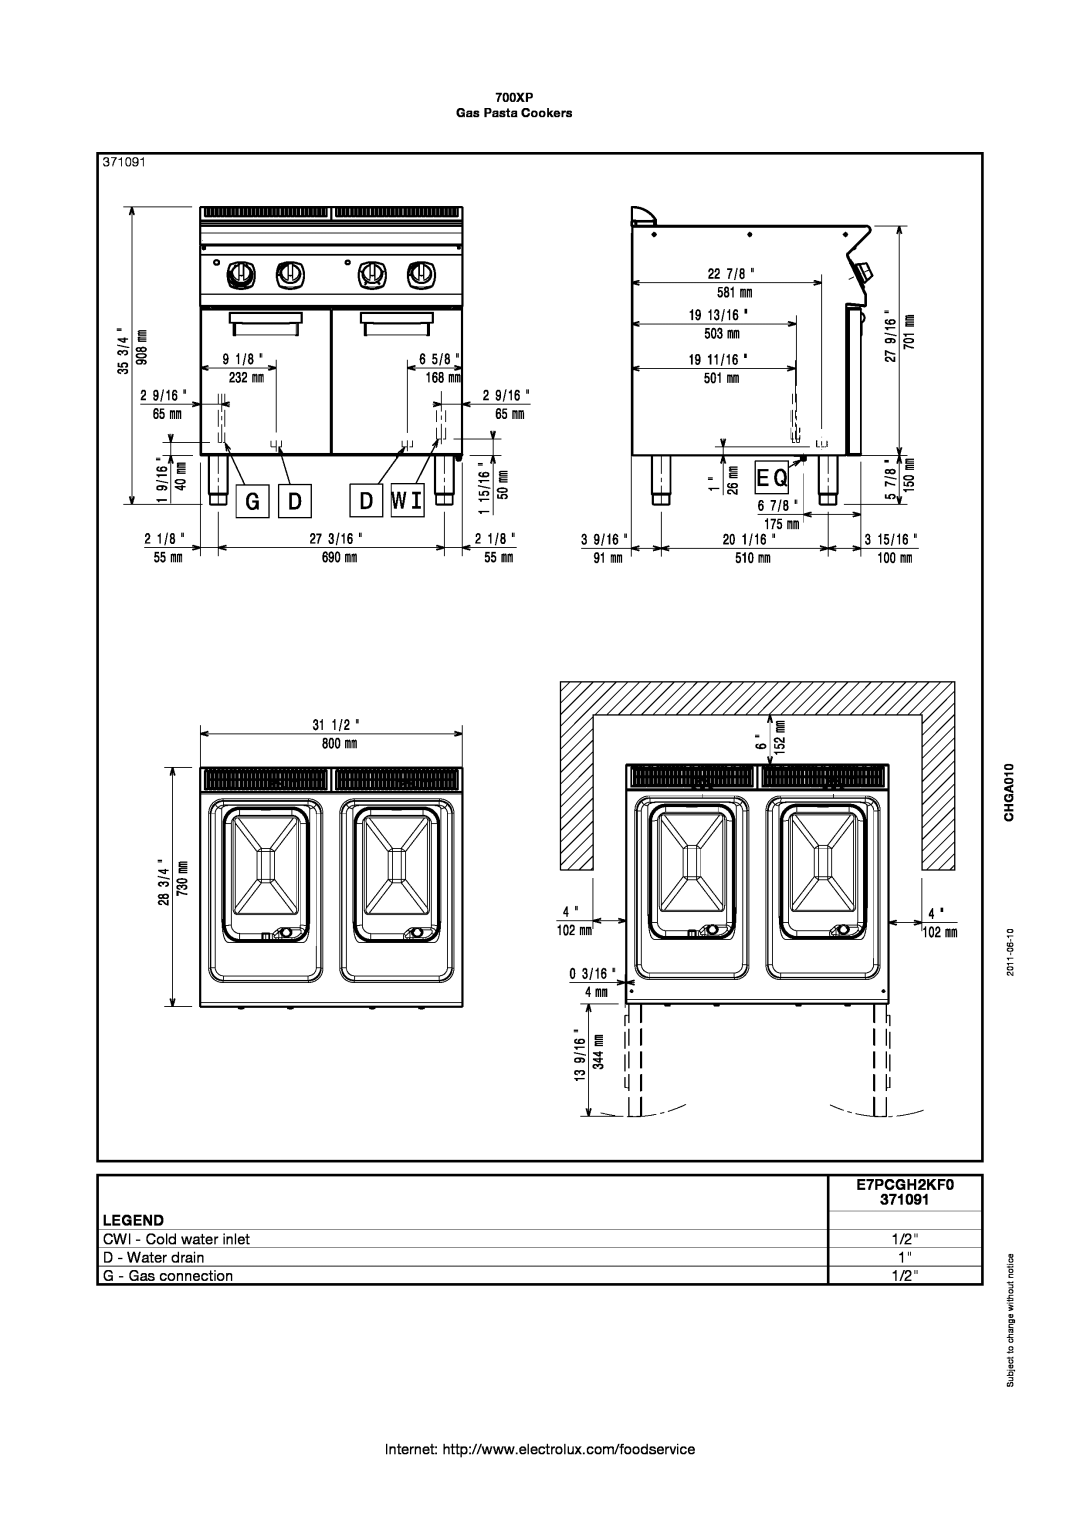 Electrolux manual E7PCGH2KF0, 371091, 700XP Gas Pasta Cookers, CHGA010, 2011-06-10, Subject to change without 